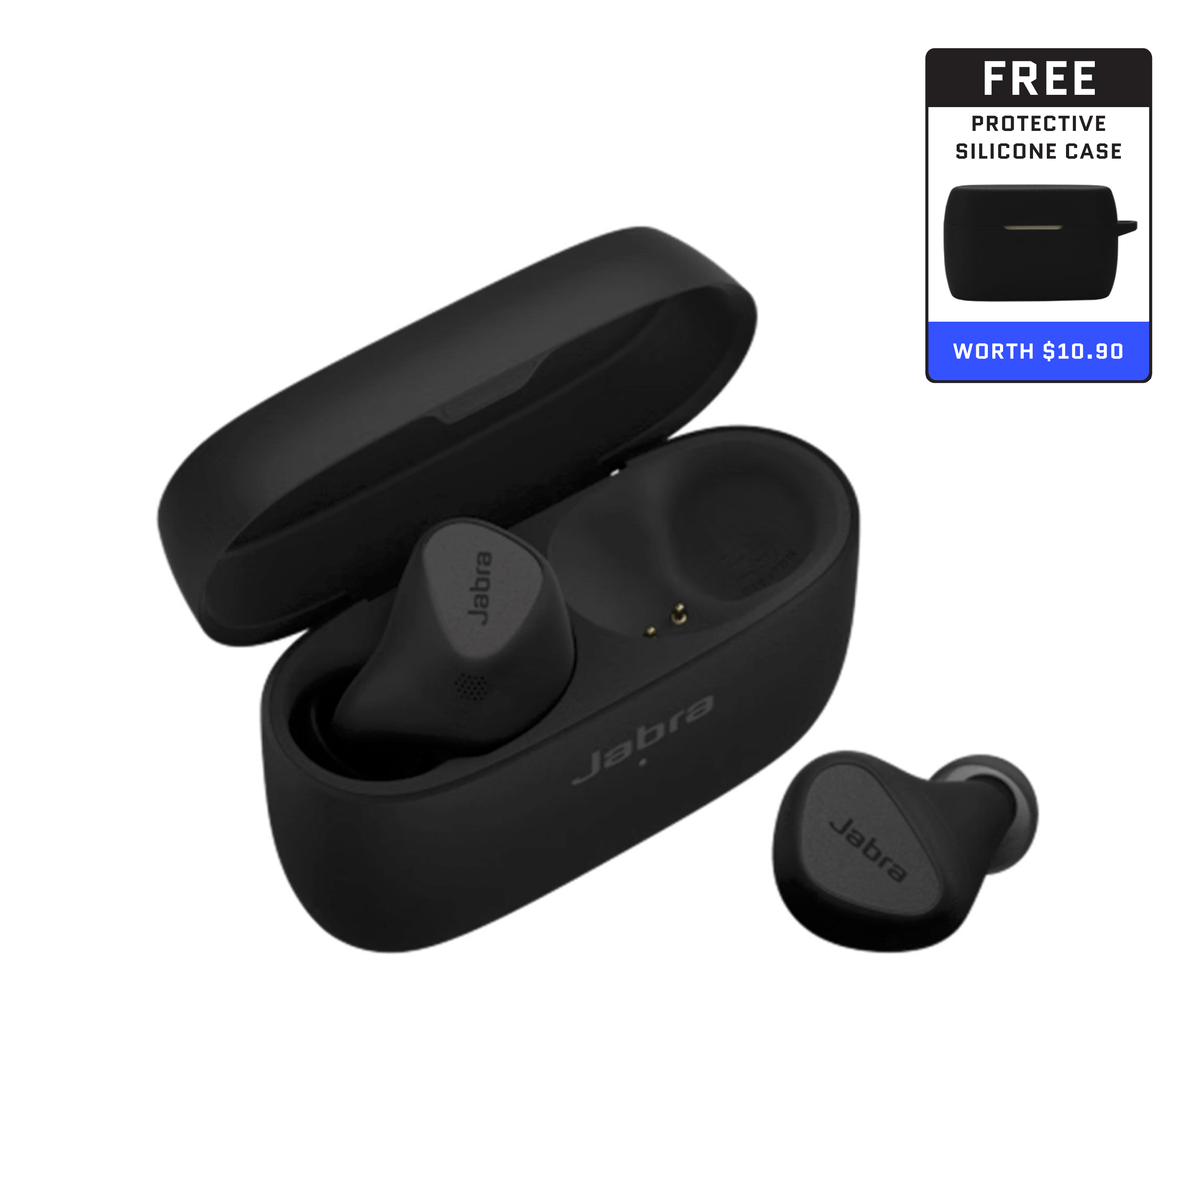 Jabra Elite 85t True Wireless Bluetooth Earbuds, Copper Black – Advanced  Noise-Cancelling Earbuds with Charging Case for Calls & Music – Wireless